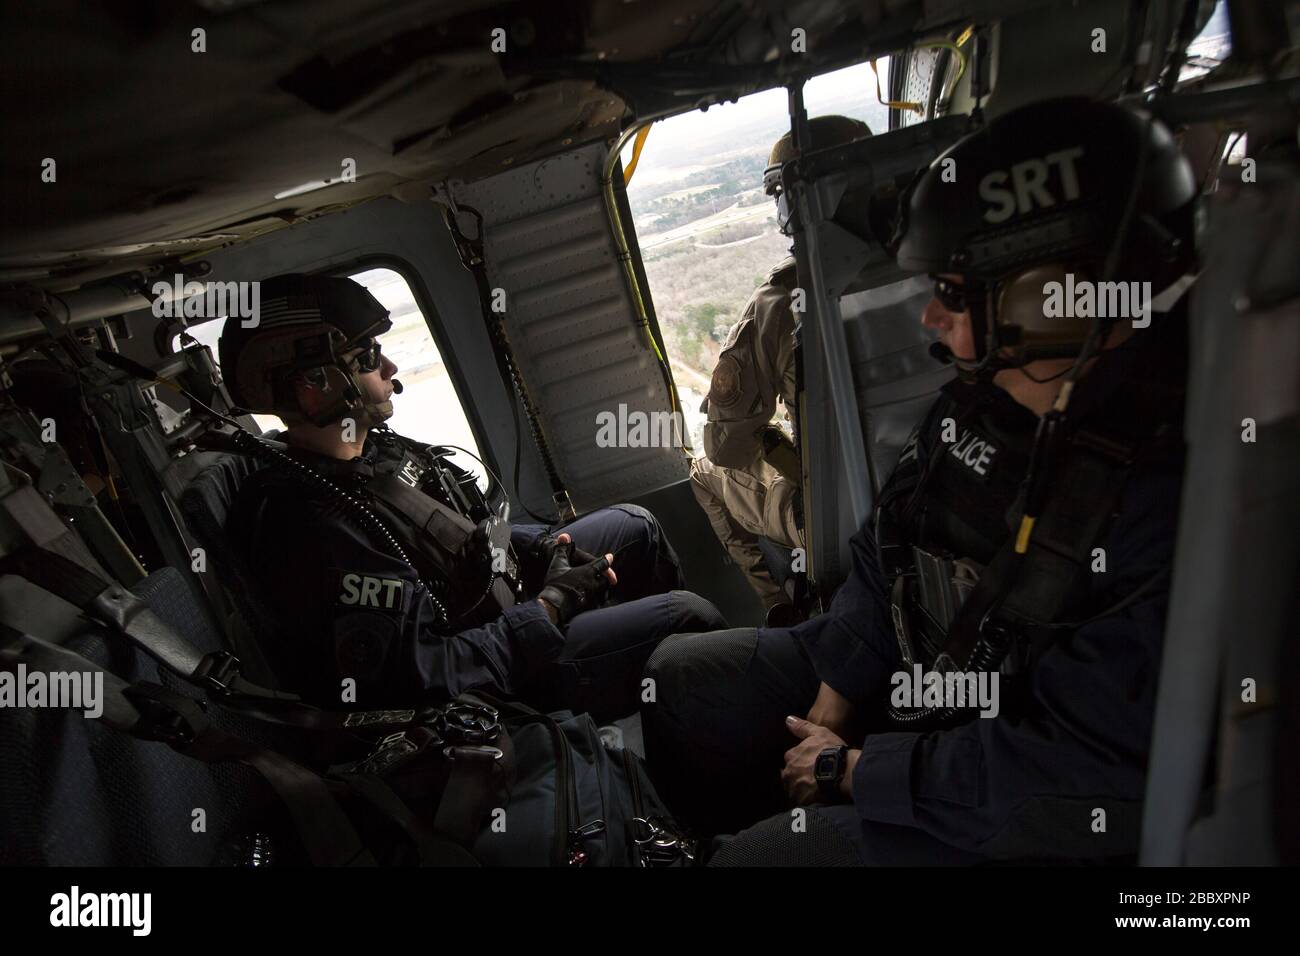 Members of the U.S. Customs and Border Protection, Office of Field Operations Special Response Team, remain prepared during a flight on an AMO UH-60 Black Hawk helicopter air-intercept training exercise as they provide airspace security for Super Bowl LI, in Conroe, Texas, Feb. 1, 2017. Units with Air and Marine Operations and Office of Field Operations teamed up with the Civil Air Patrol  to practice an air-to-air intercept using two AMO UH-60 Black Hawk helicopters and two C-550 Citation jets to track down a simulated incursion into restricted airspace. Stock Photo